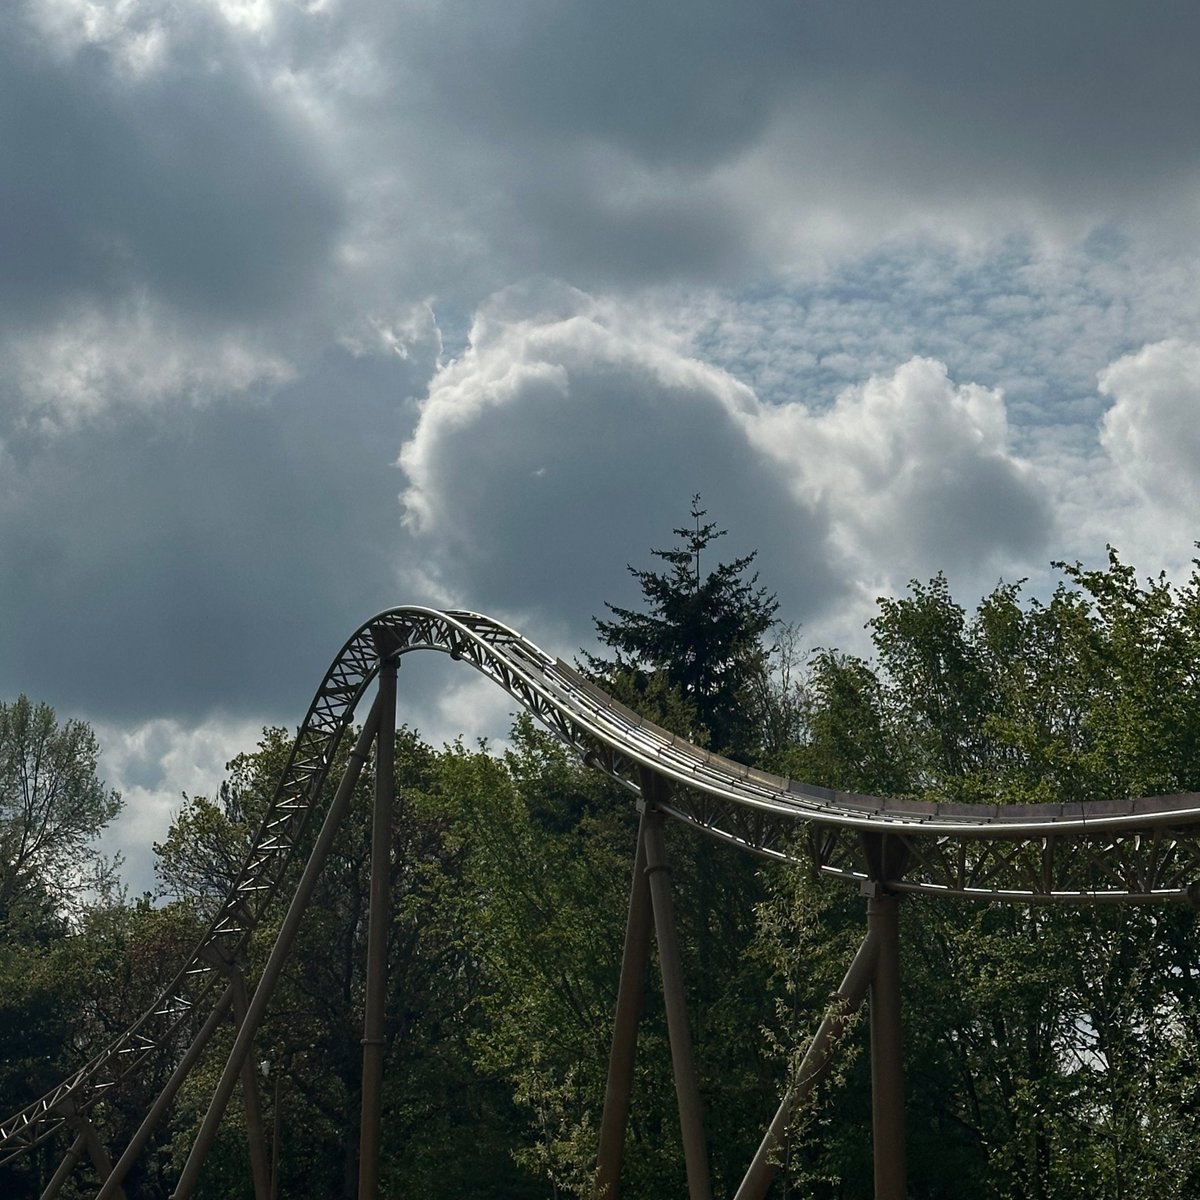 (1/2) #TrainlessTuesday but make it #Hyperia🤩🎢

Unlock a year of thrills with our #ThorpePark Annual Passes!🌟 

🎟️👉 thorpeparkofficial.visitlink.me/OdbiQP

#ThemePark #DayOut #Rollercoaster #Rollercoasters #Coaster #Coasters #Visit #FindYourFearless #AnnualPass #Passholder